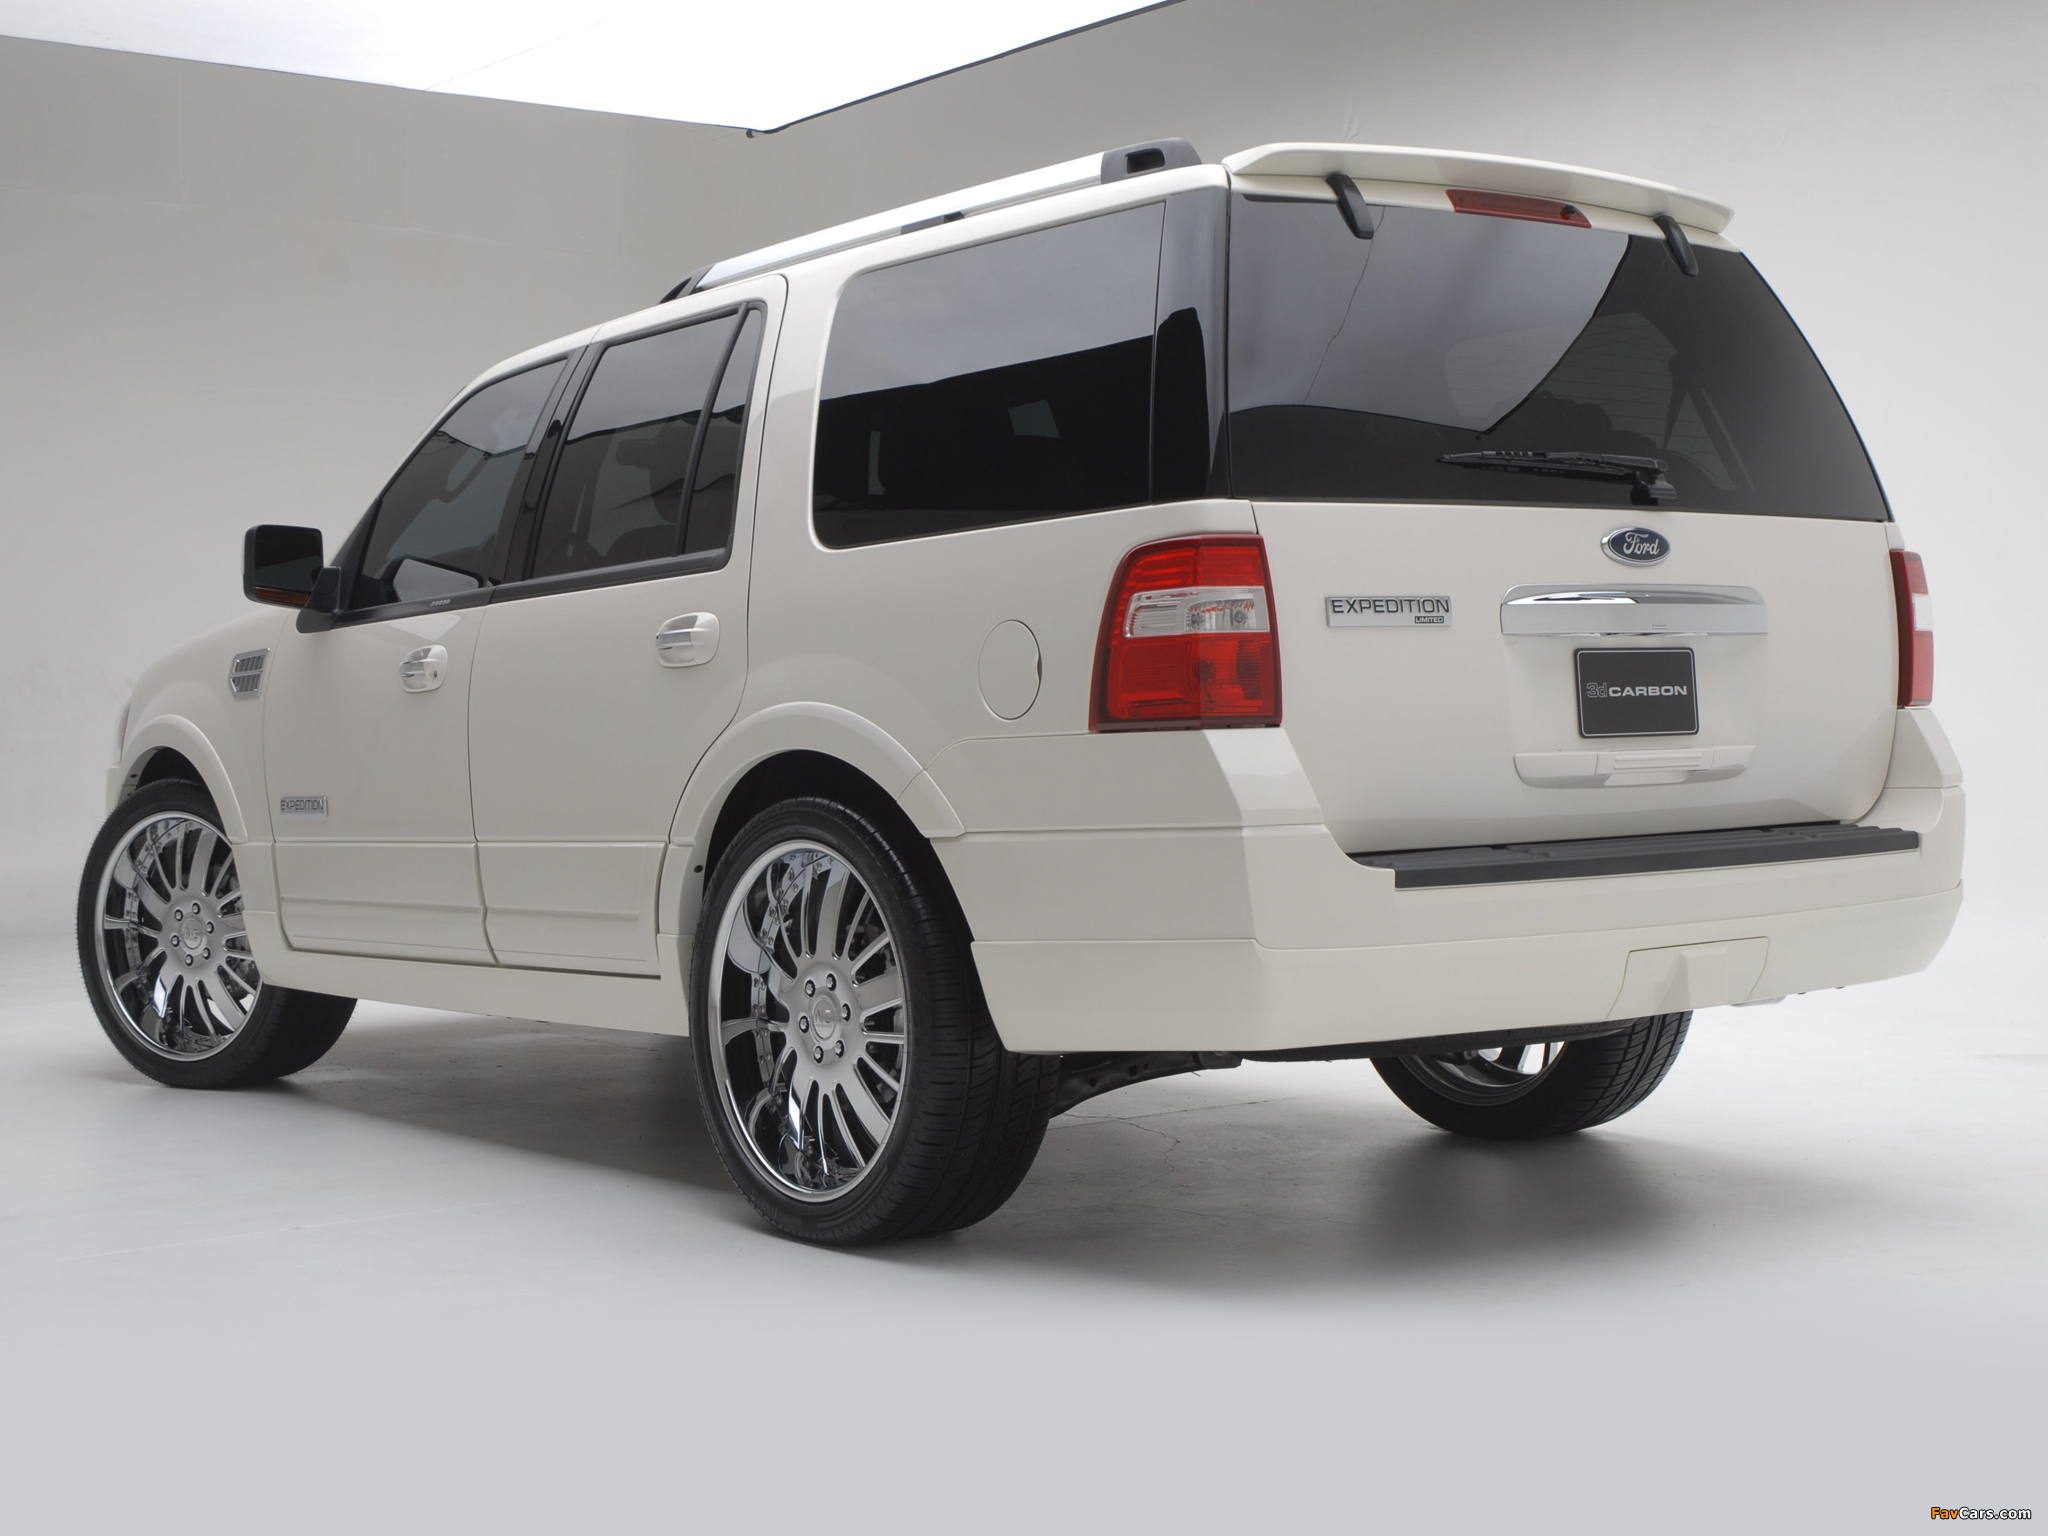 Ford Expedition Urban Rider Styling Kit by 3dCarbon 2007 images (2048 x 1536)